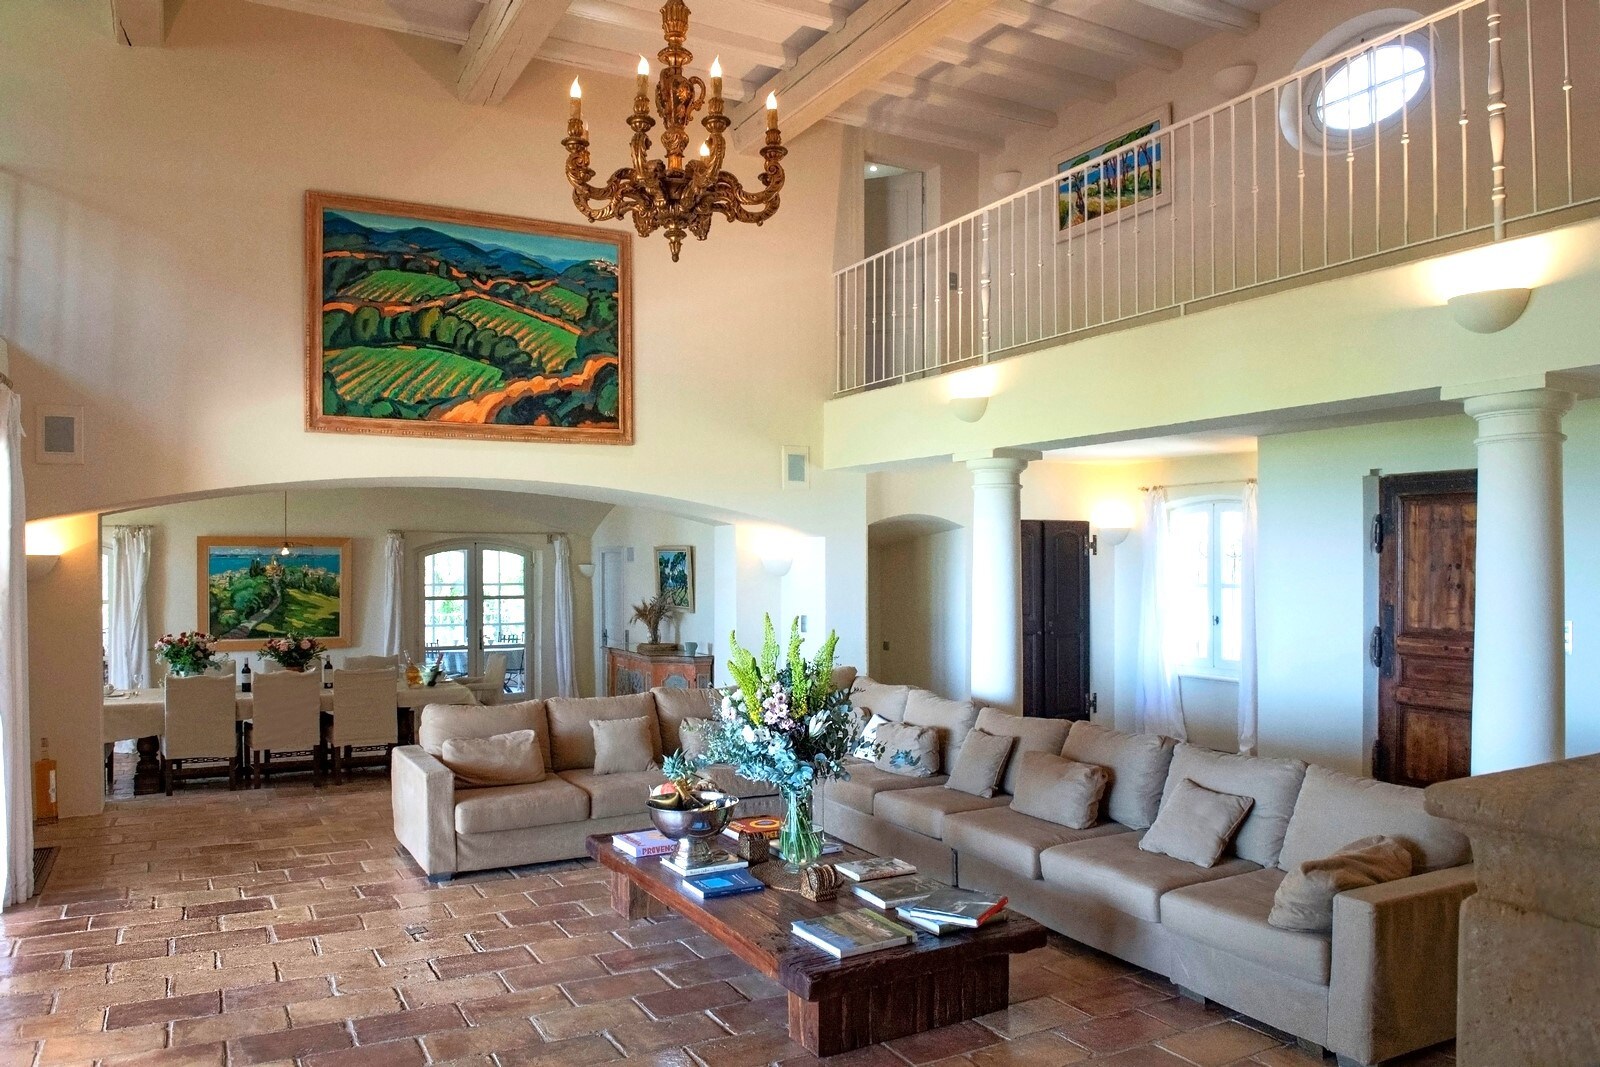 7 bedroom family villa with sea view, pool, jacuzzi and tennis in La Croix Valmer